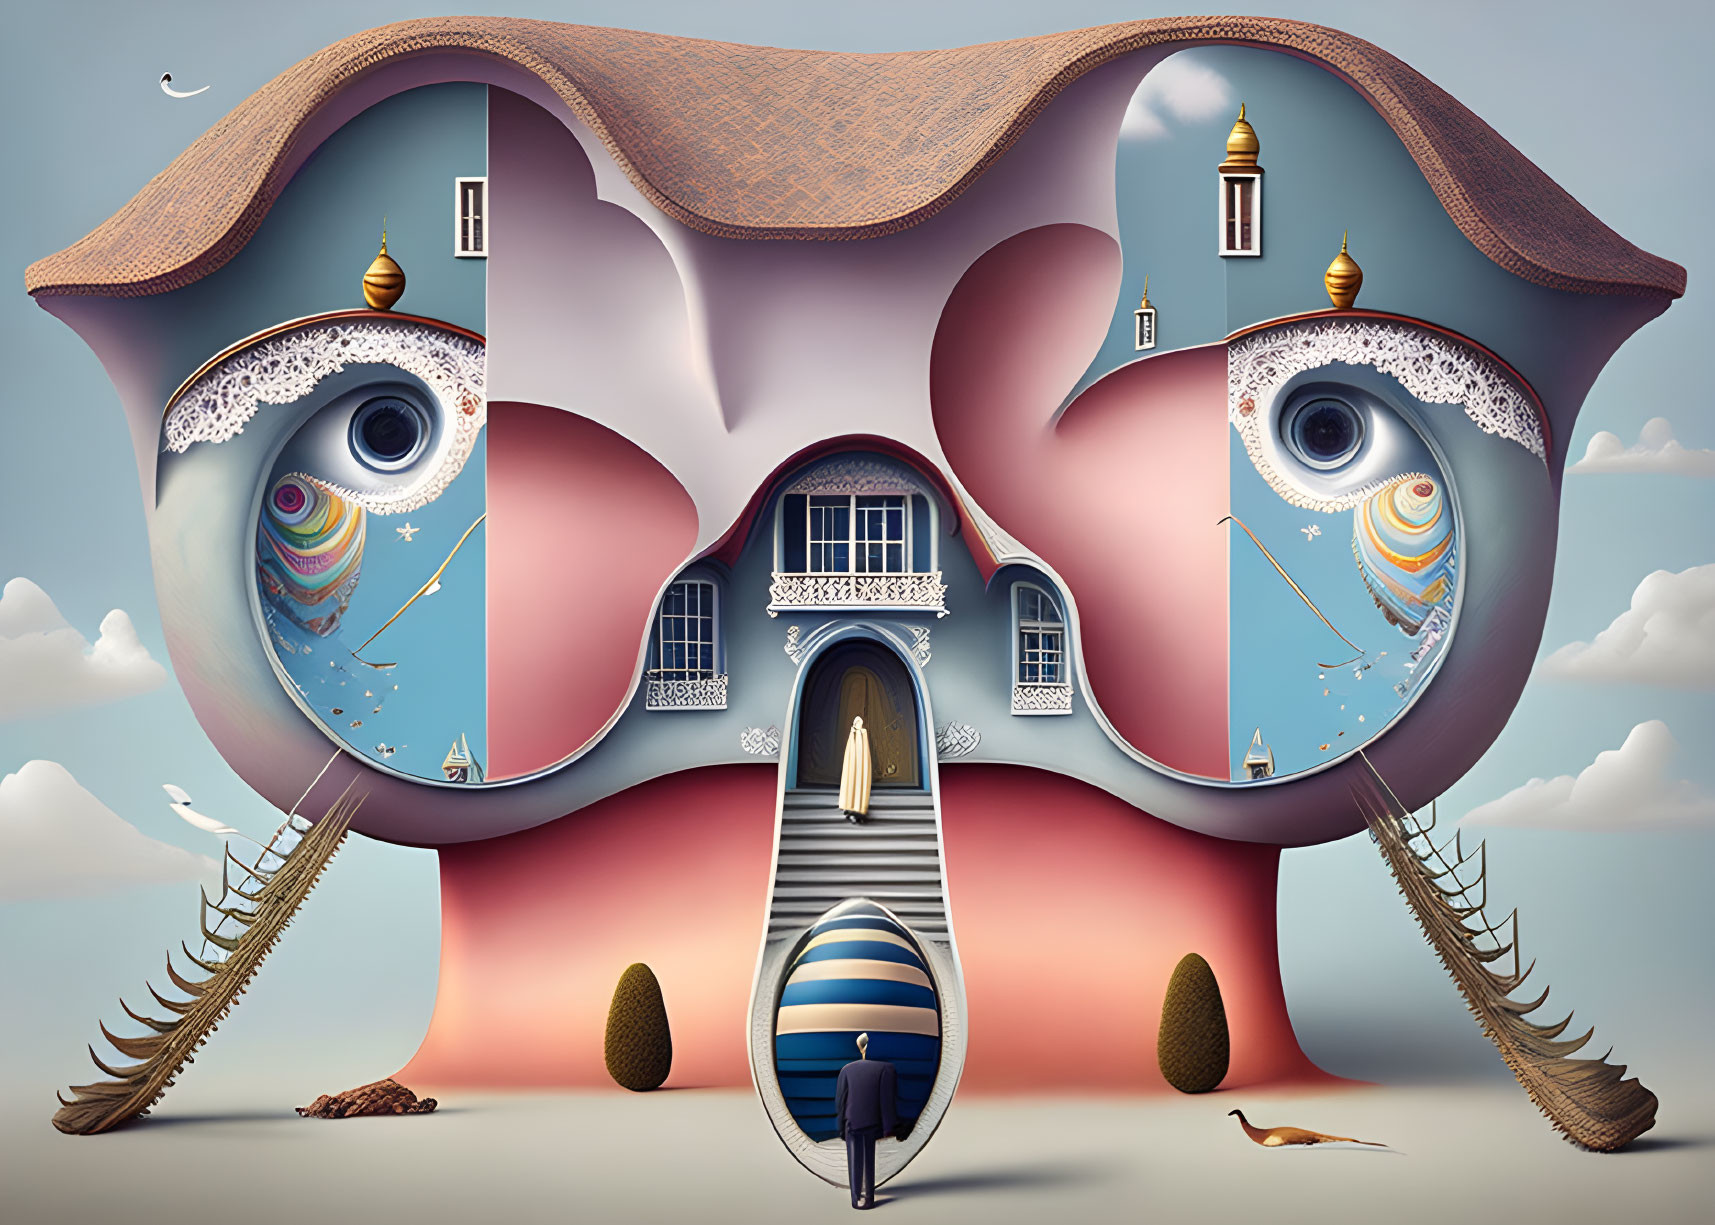 Building with Facial Features and Swirling Cloud Eyes, Staircase to Mouth Door